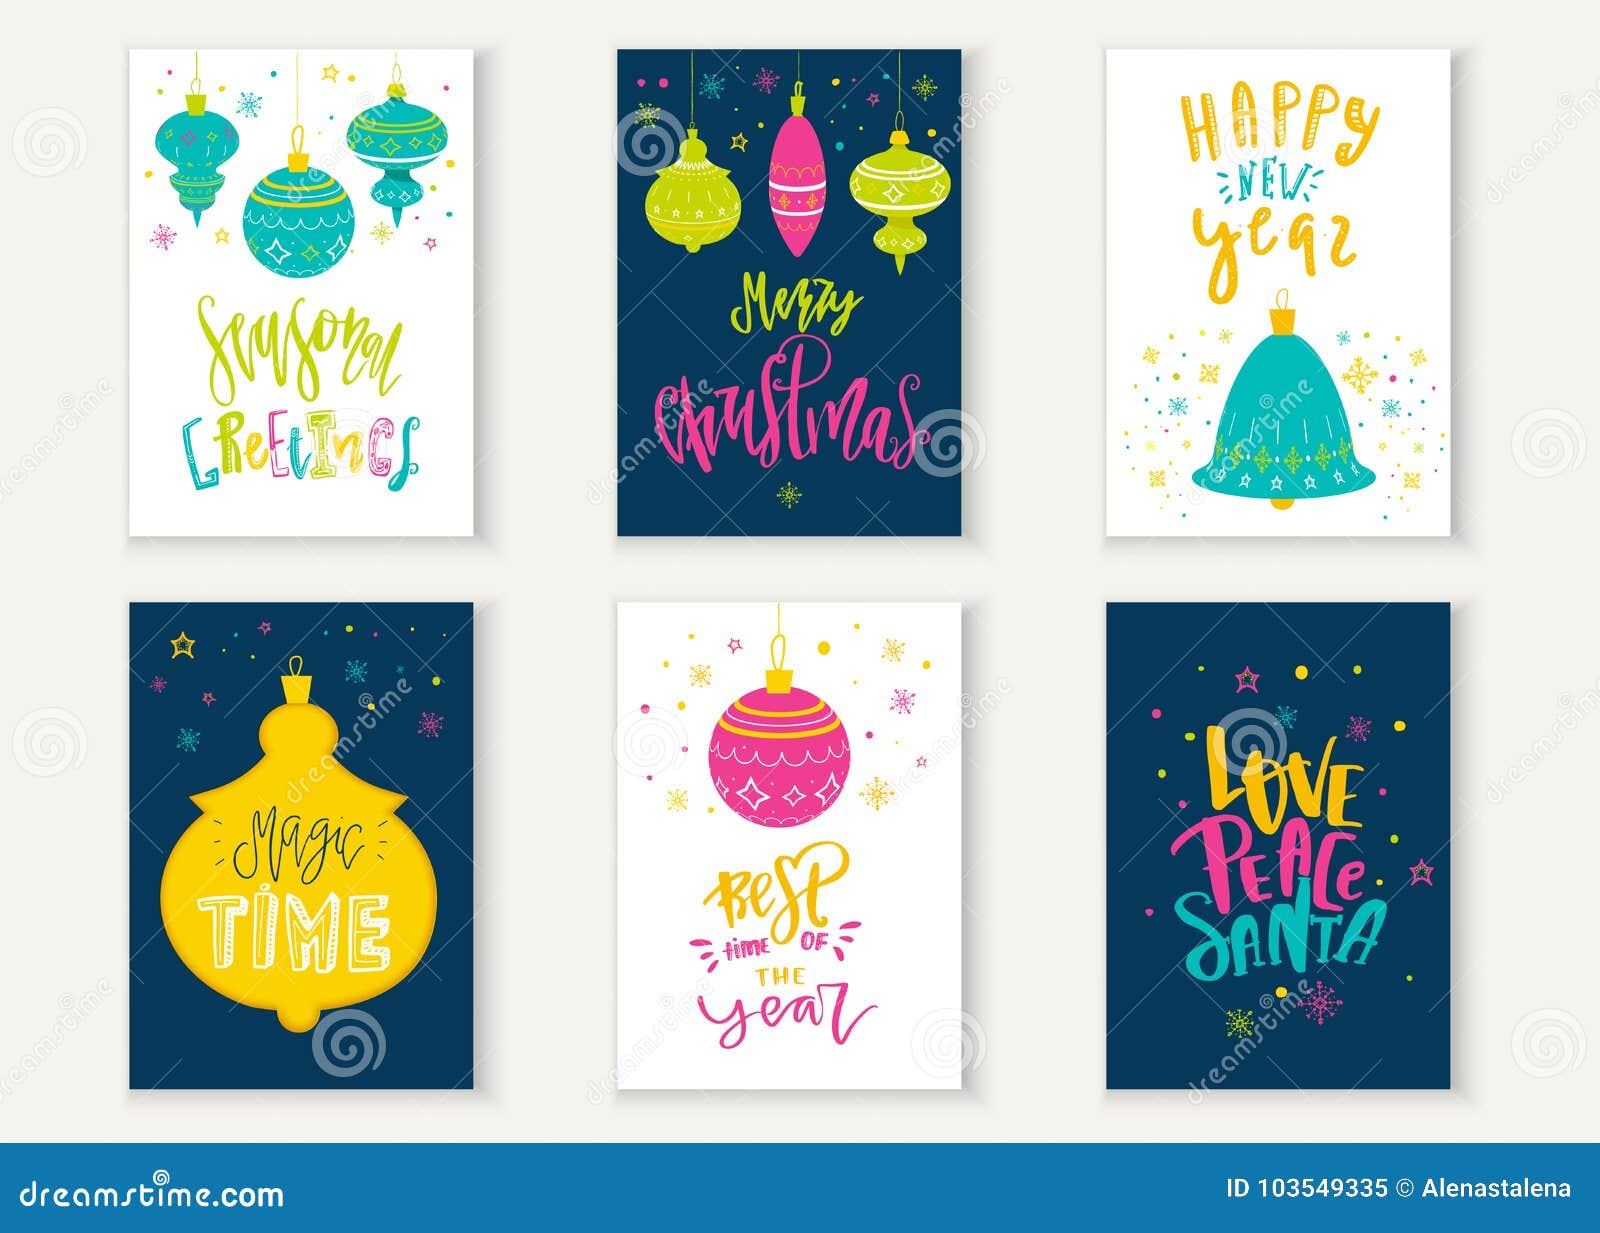 Bright Merry Christmas typographic lettering cards set Vector logo text design Can be Used for banners ts site headers